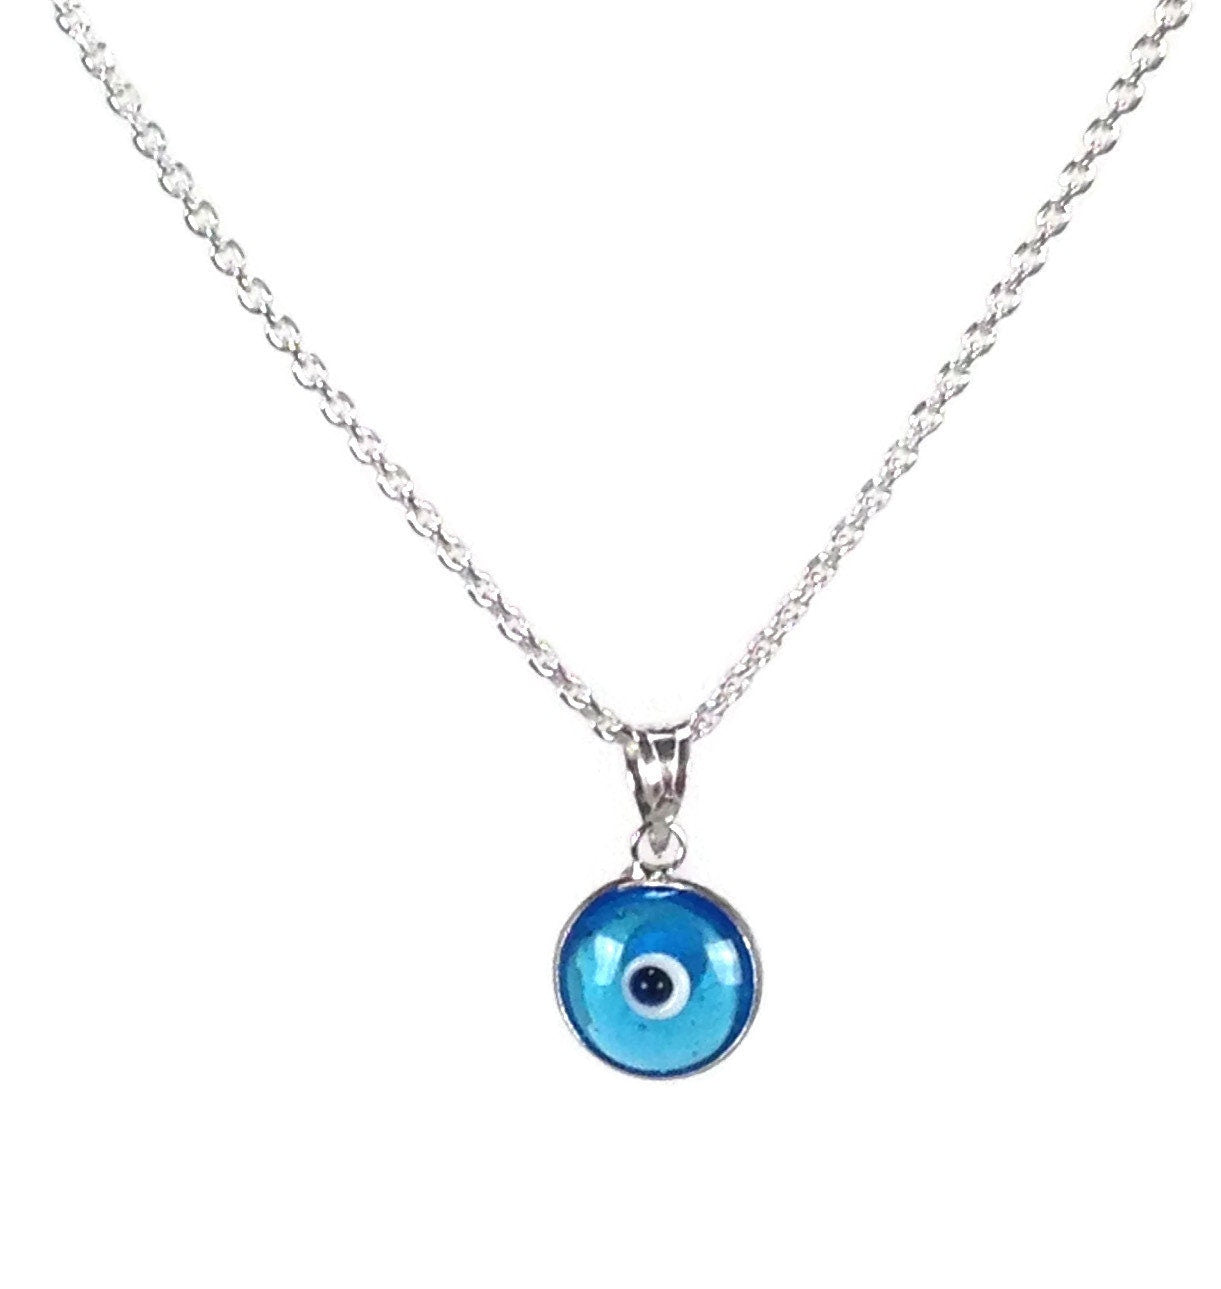 Silver evil eye necklace, four colors to choose, jewelry protection